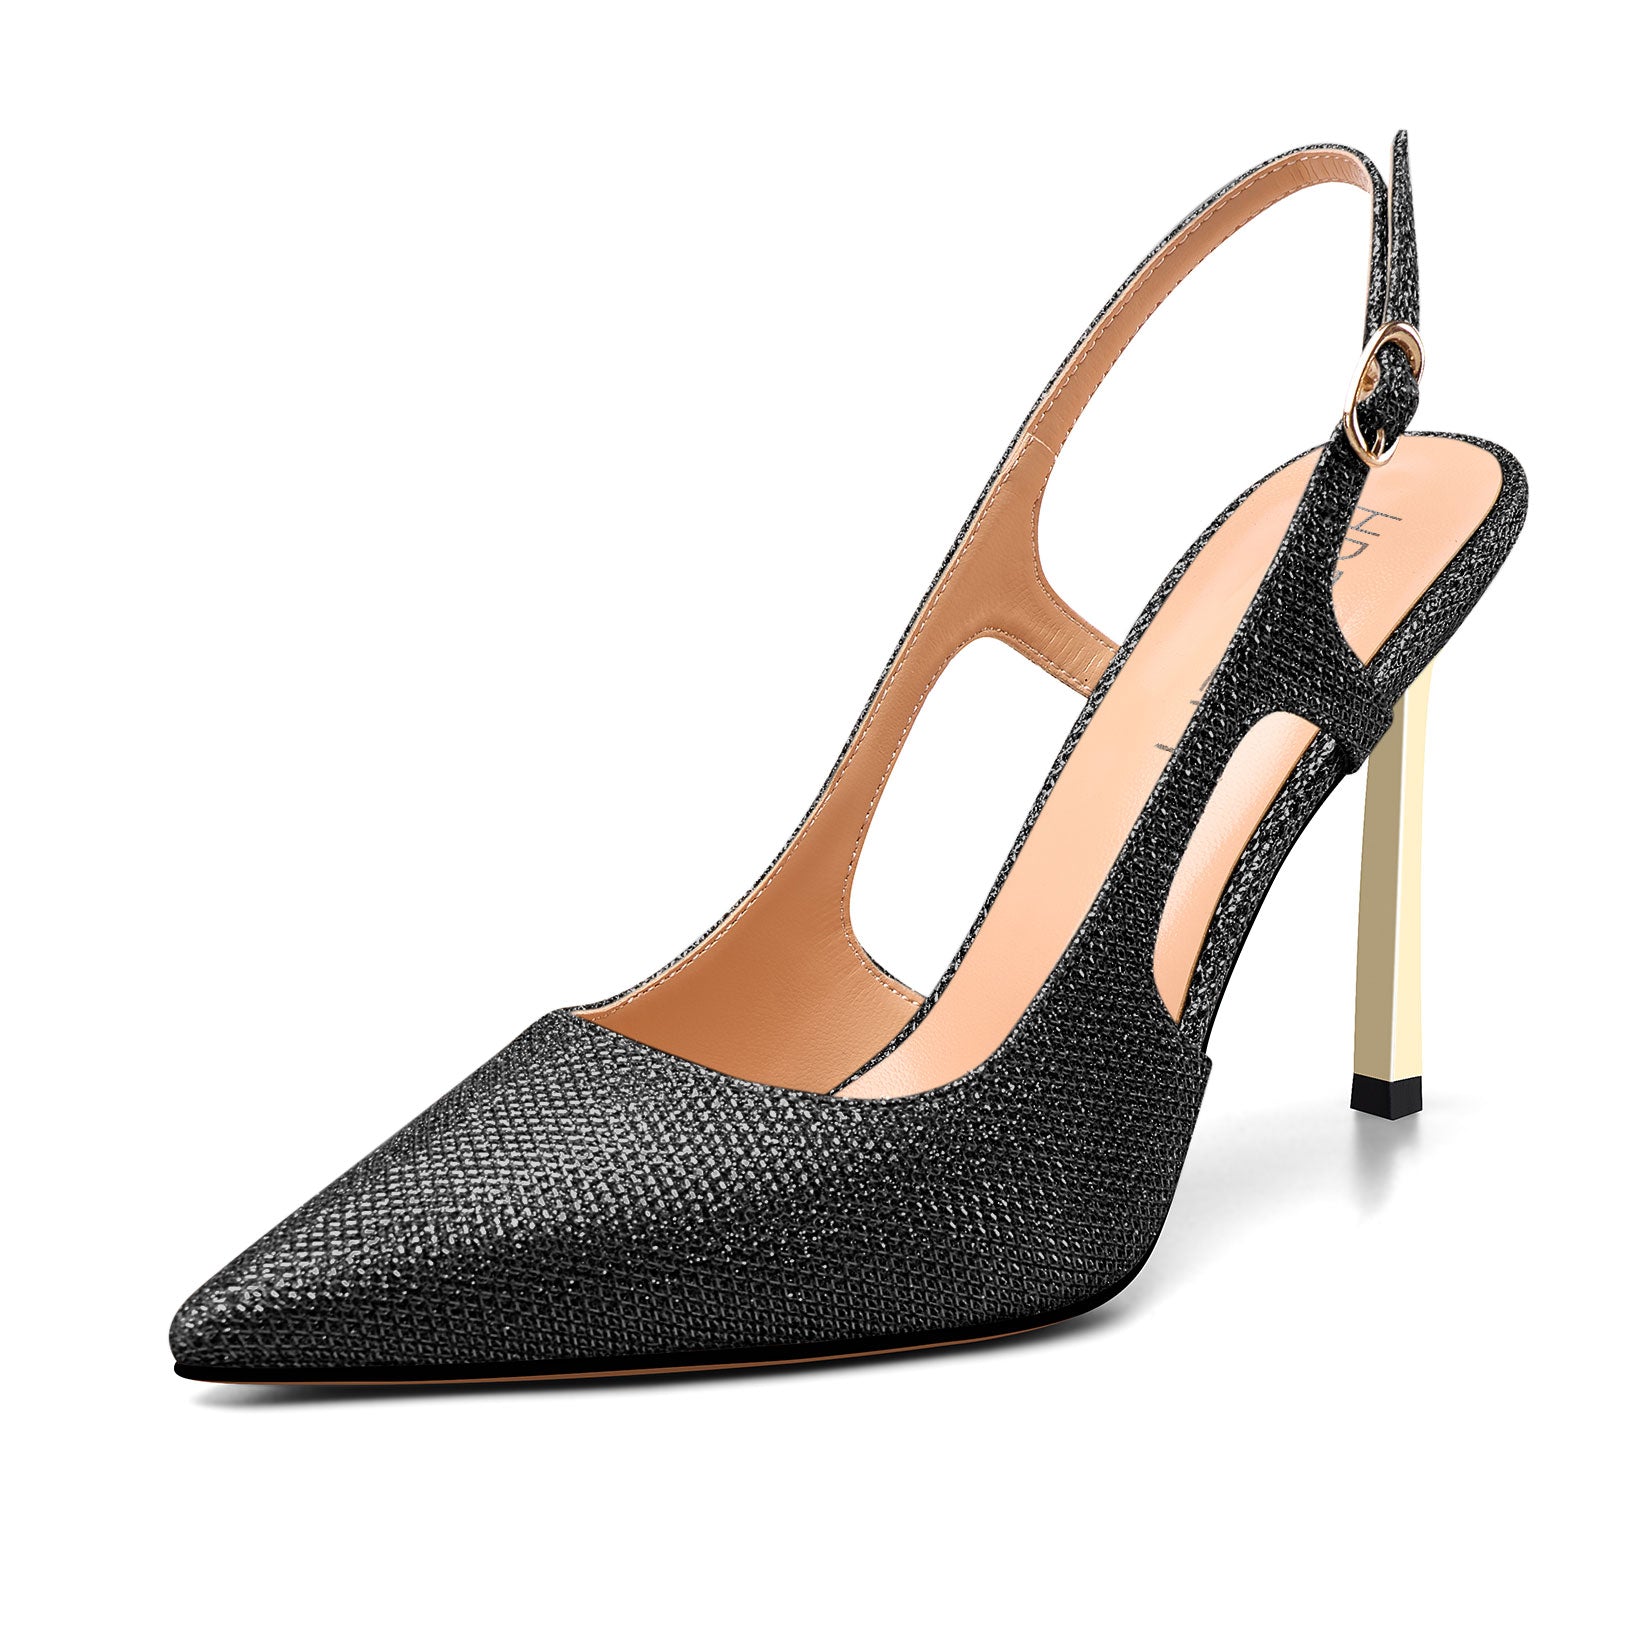 Women 8.5CM Stiletto Heel Slingback Pumps with Pointed-Toe, Dress Shiny and Stylish Bling Slip-on Shoes